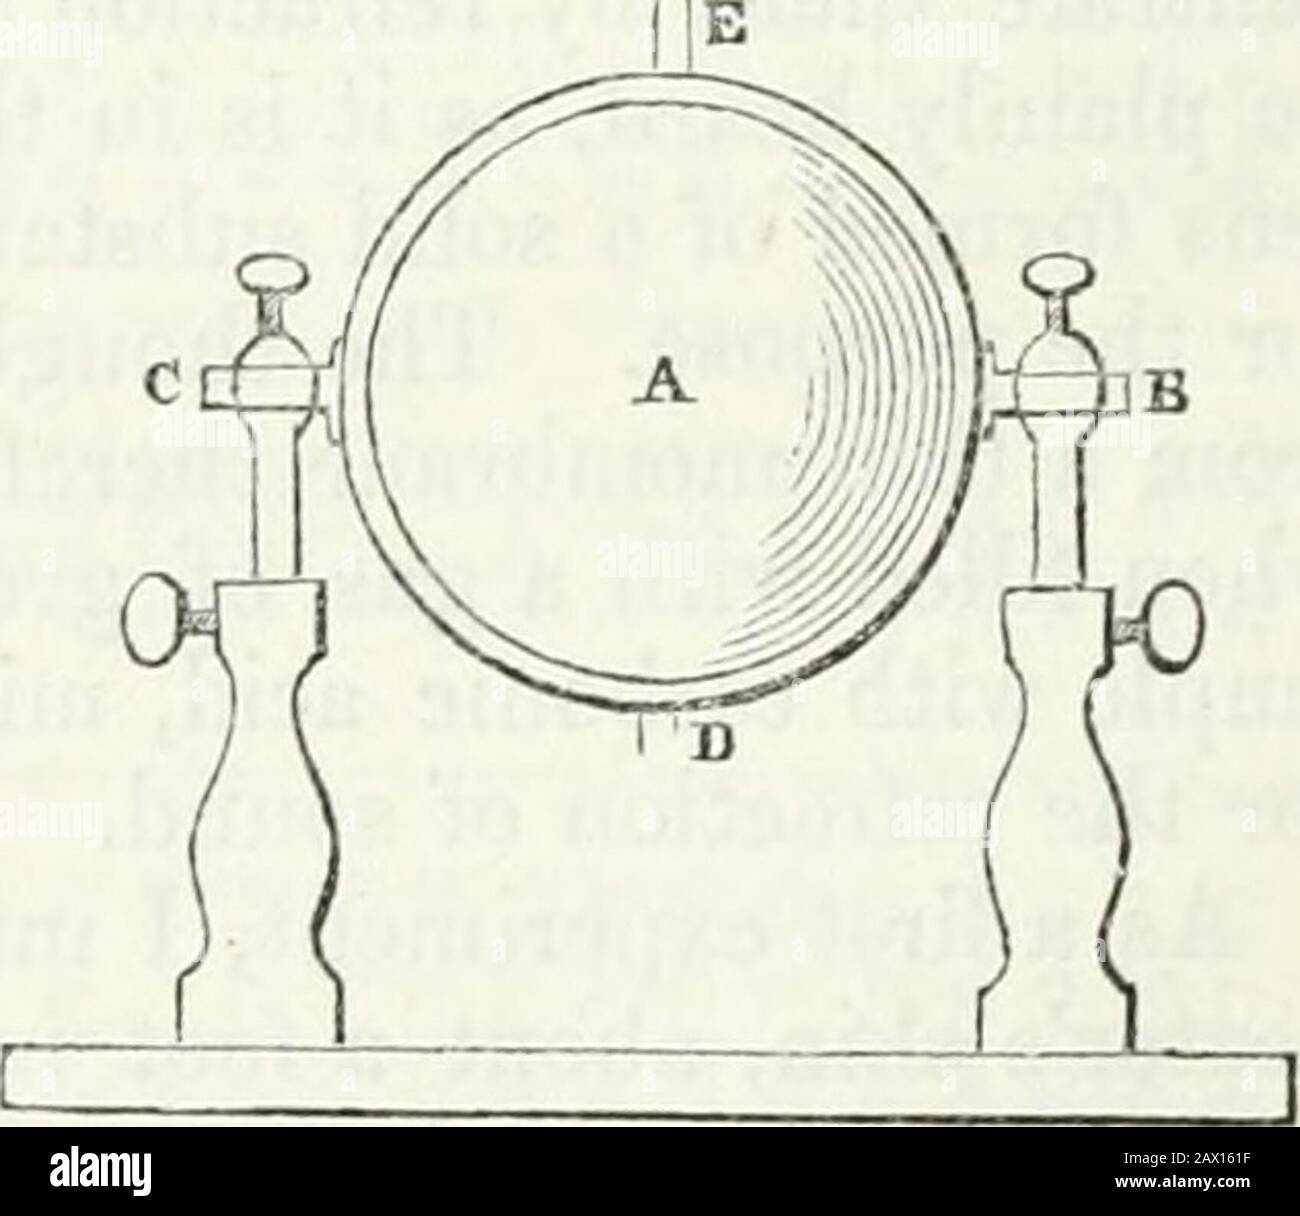 The Philosophical magazine; a journal of theoretical, experimental and applied physics . wo diametri-cally opposite points of the hoop, two lead tubes are solderedwhich serve as axes, and rest upon two wooden pillars, so thatthe lens can be turned round a horizontal axis and thus easilyset in either a perpendicular or horizontal position; by length-ening or shortening the two wooden pillars the lens can be seteither higher or lower. In theannexed woodcut the lens and itssupports are repicsented; at Dand E are two other lead tubessoldered to the hoop, and madeuse of to inflate the lens. I filli Stock Photo